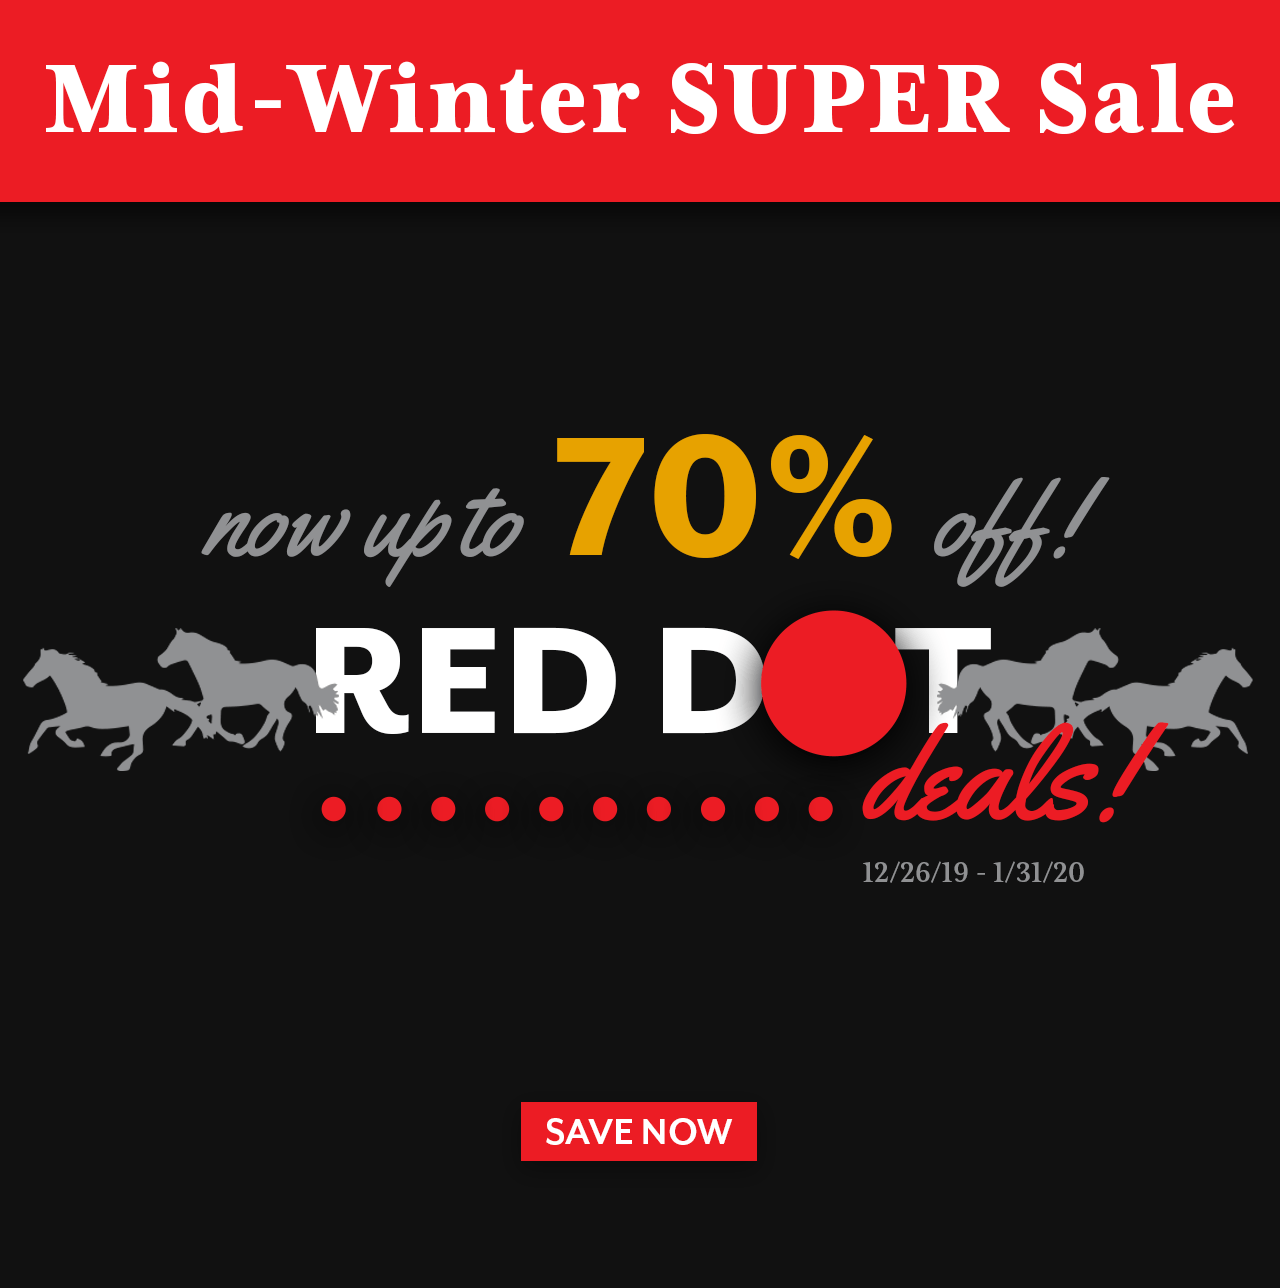 Our Mid-Winter Super Sale ends in just a few days. Be sure to save before these deals are gone!